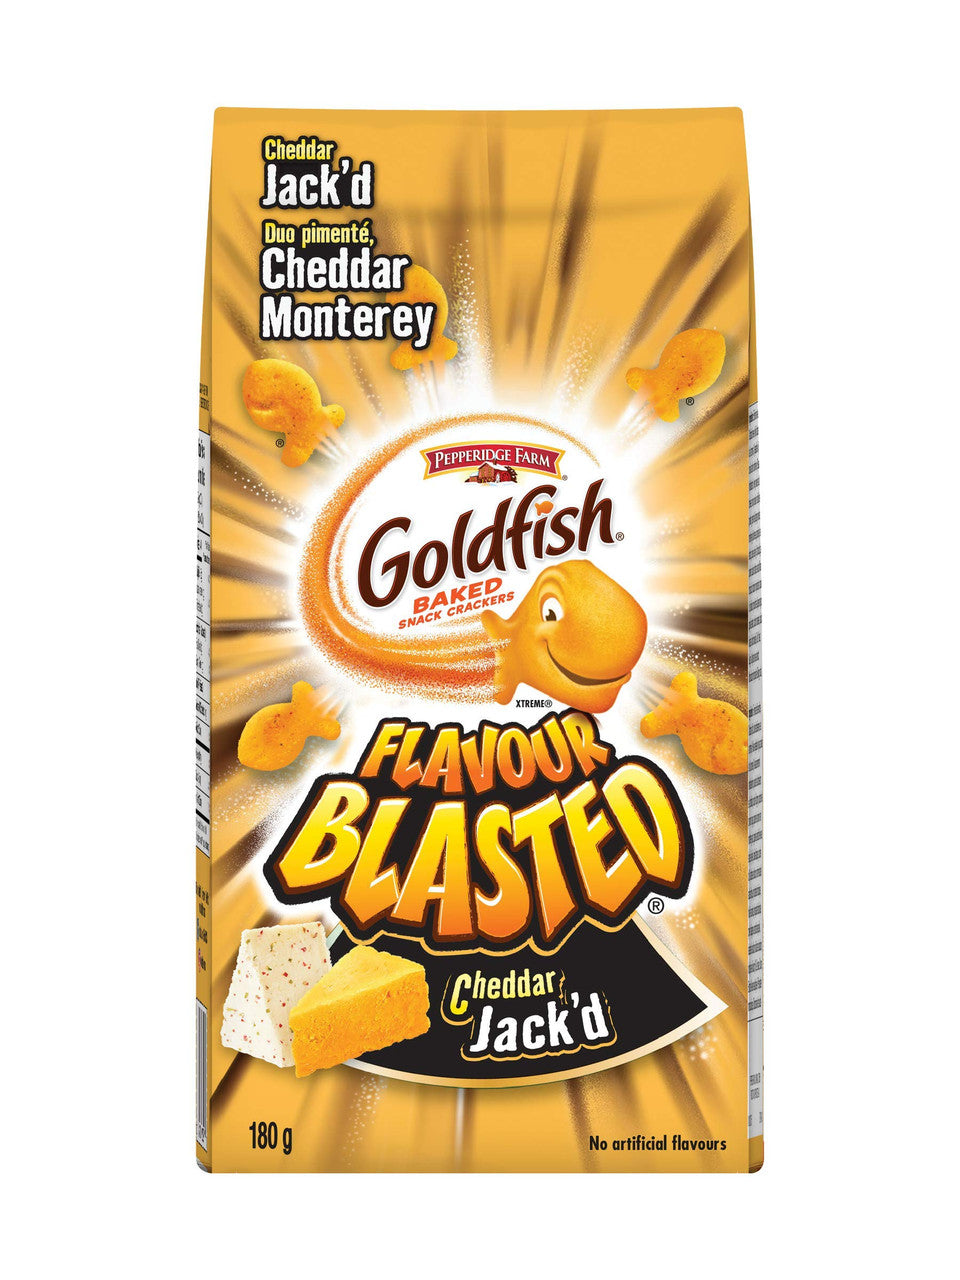 Pepperidge Farm Goldfish Cheddar Jack’d Crackers, Flavour Blasted, 180g/6.3 oz., {Imported from Canada}